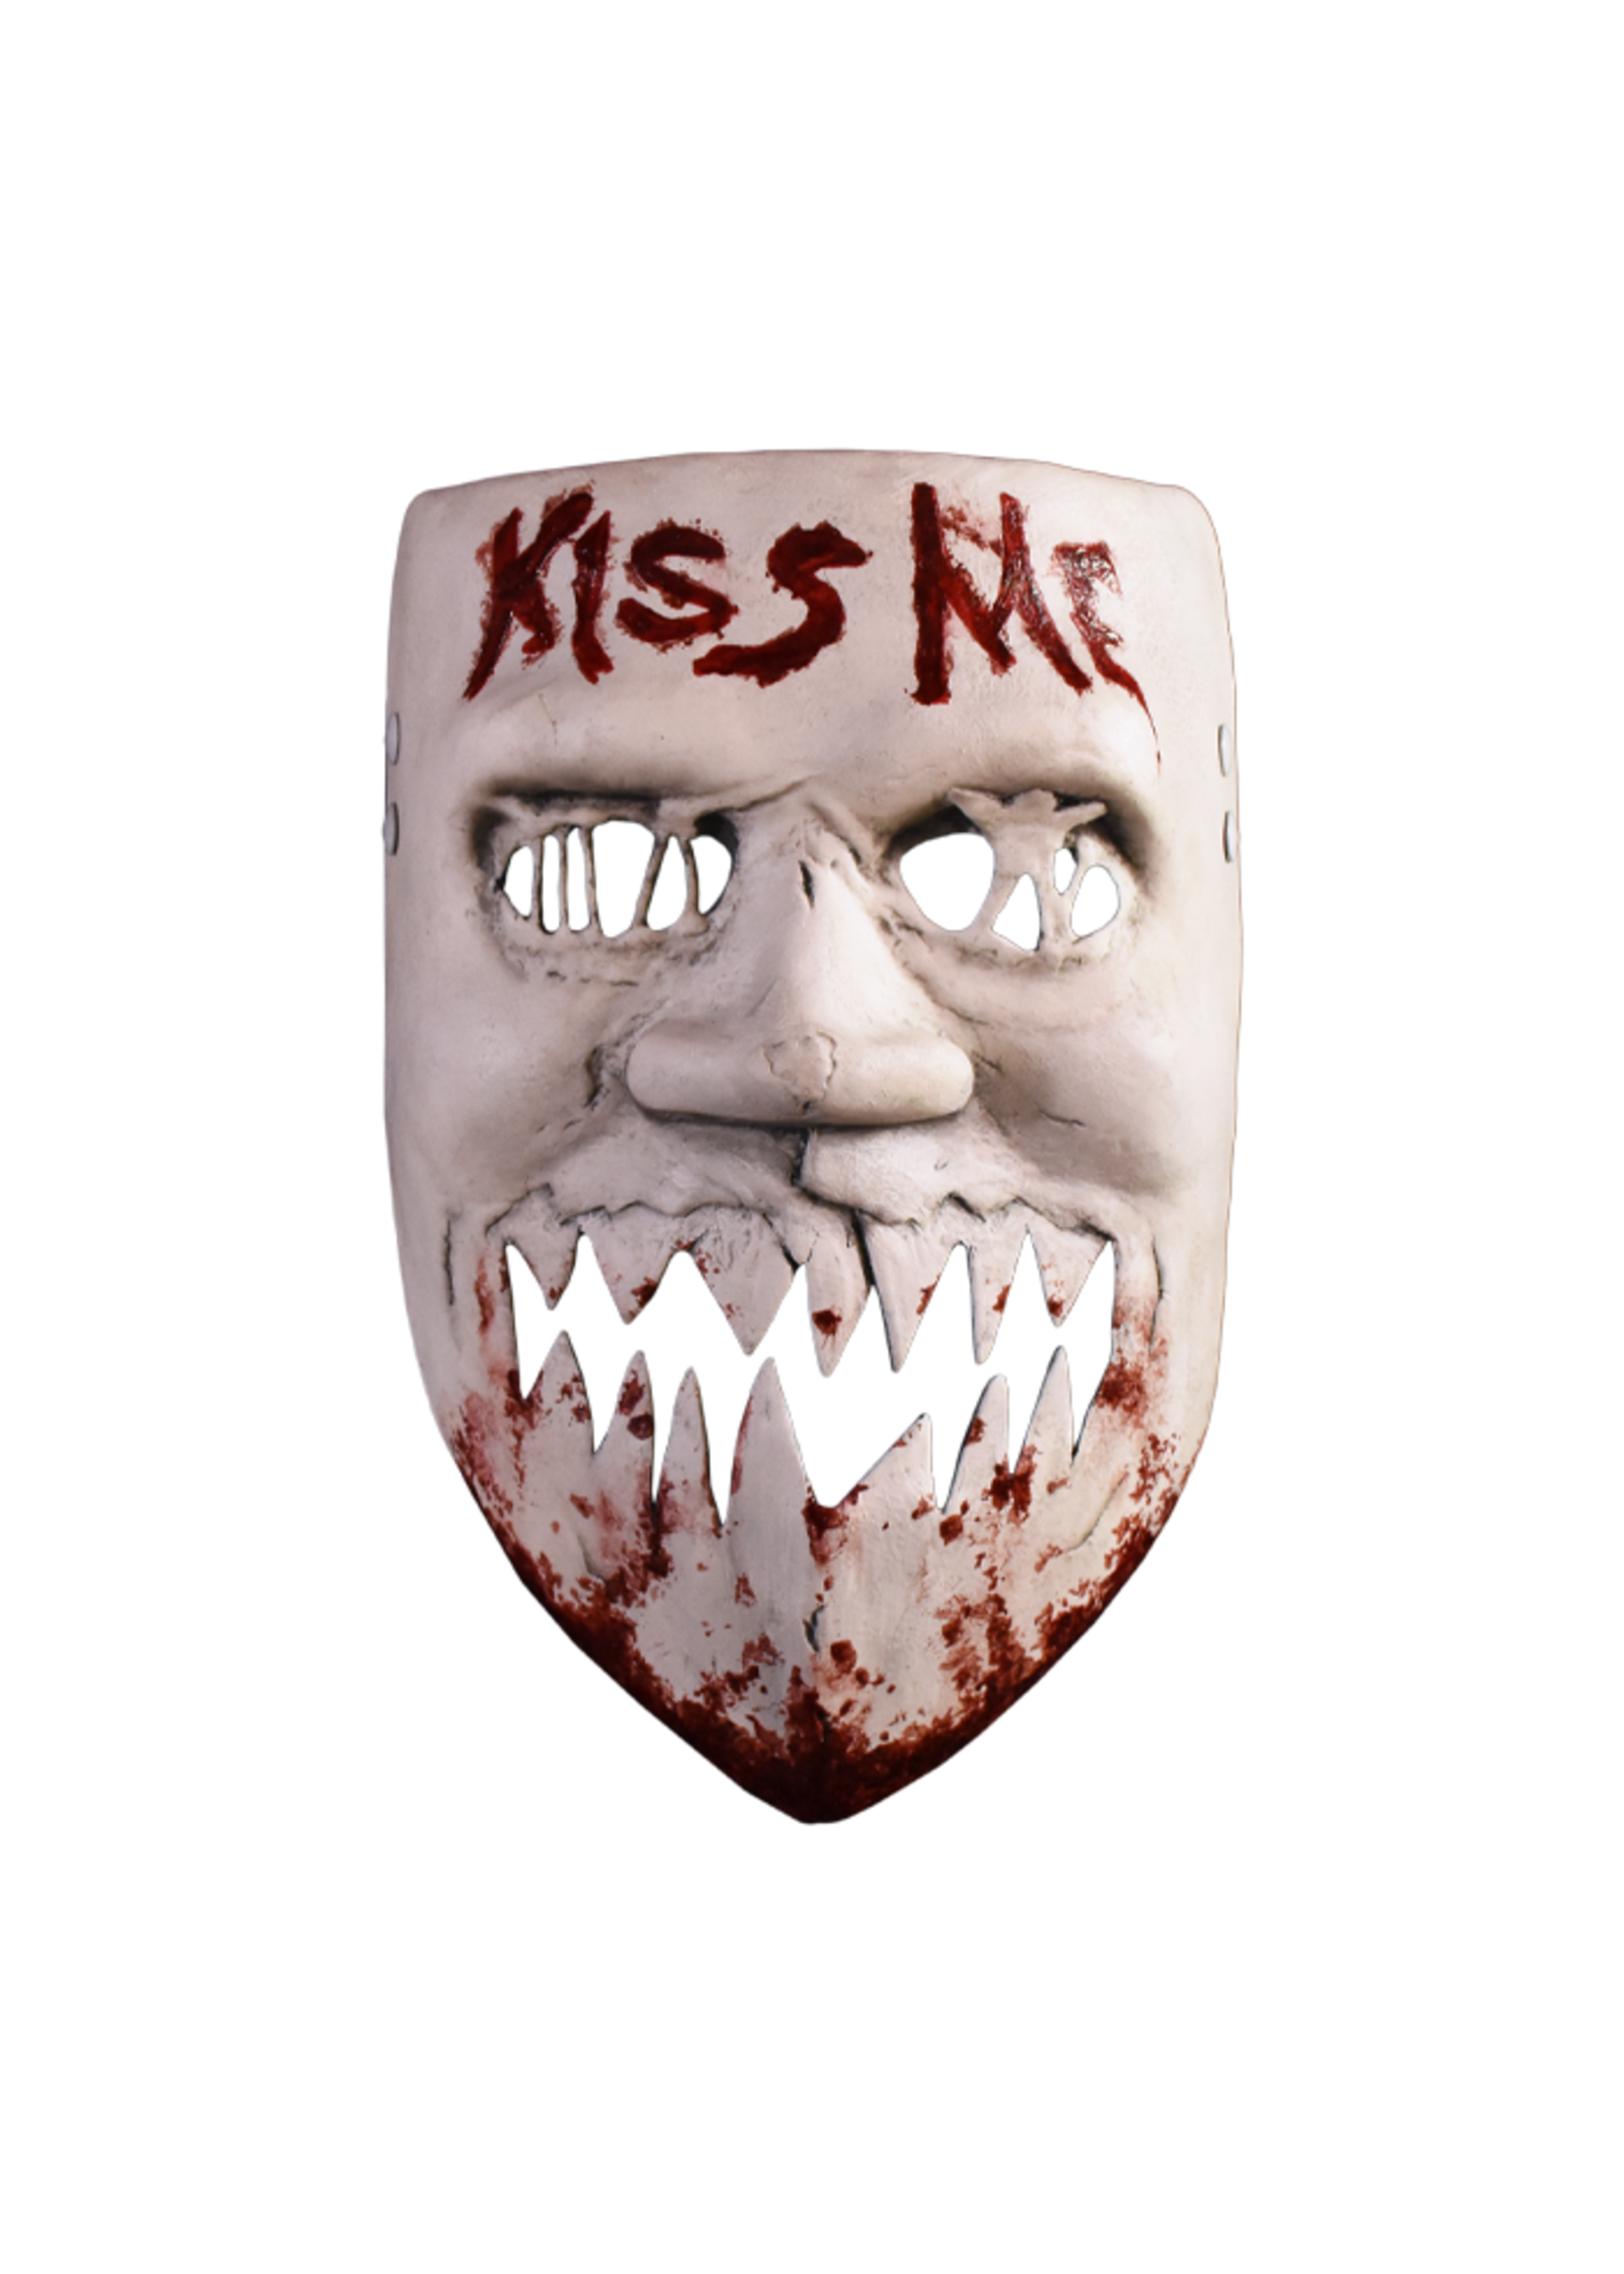 INJECTION - The Purge: Election Year - Kiss Me Injection Mask